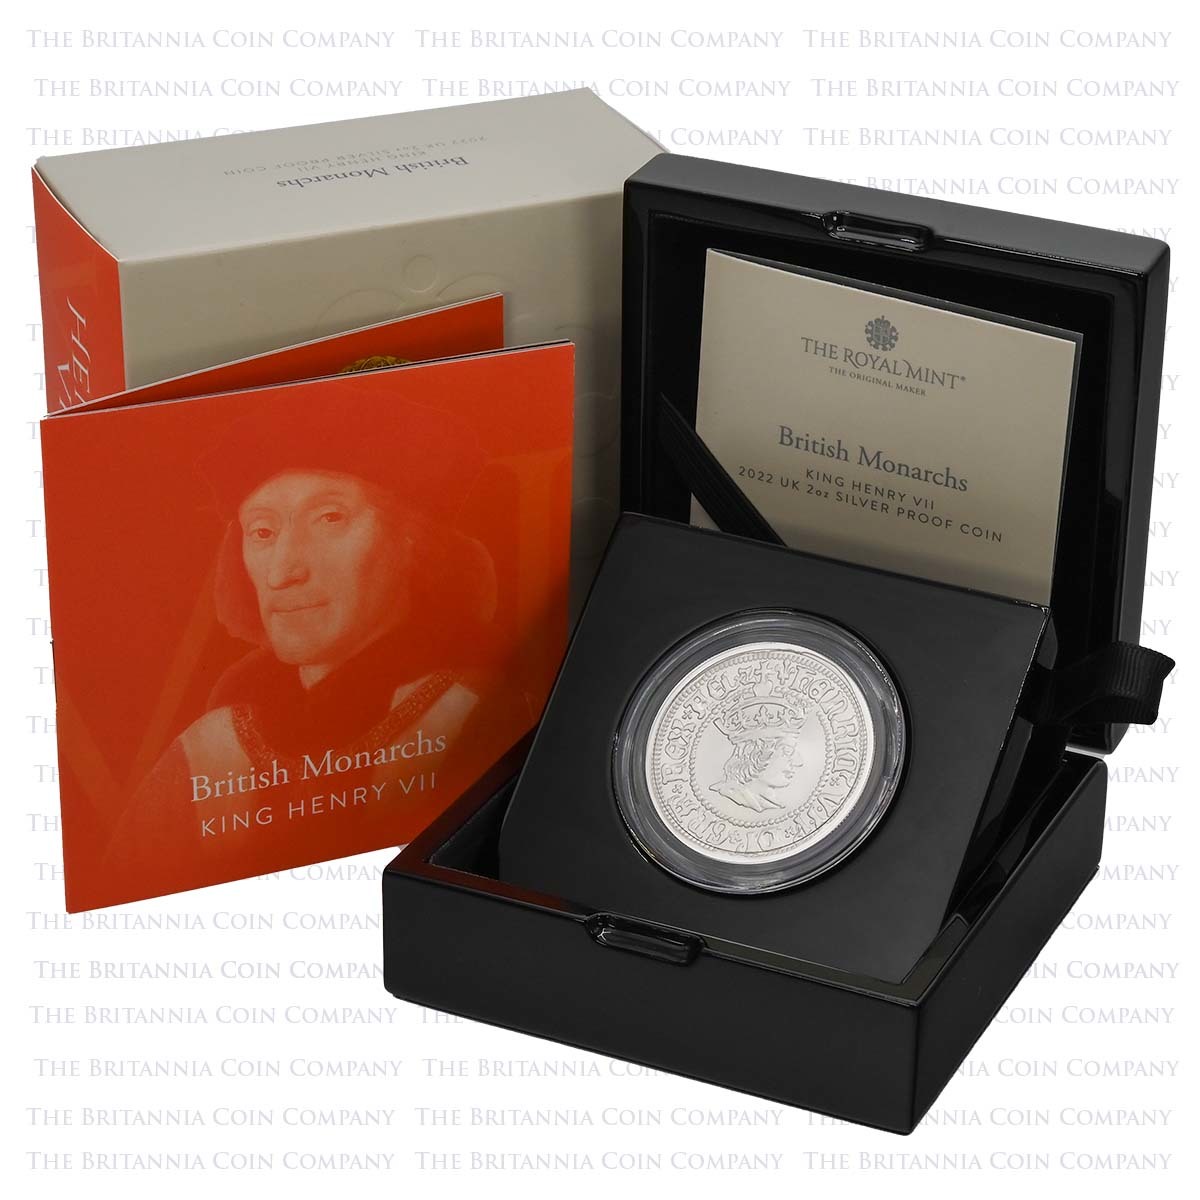 UK22H7S20 2022 British Monarchs Henry VII 2 Ounce Silver Proof Boxed